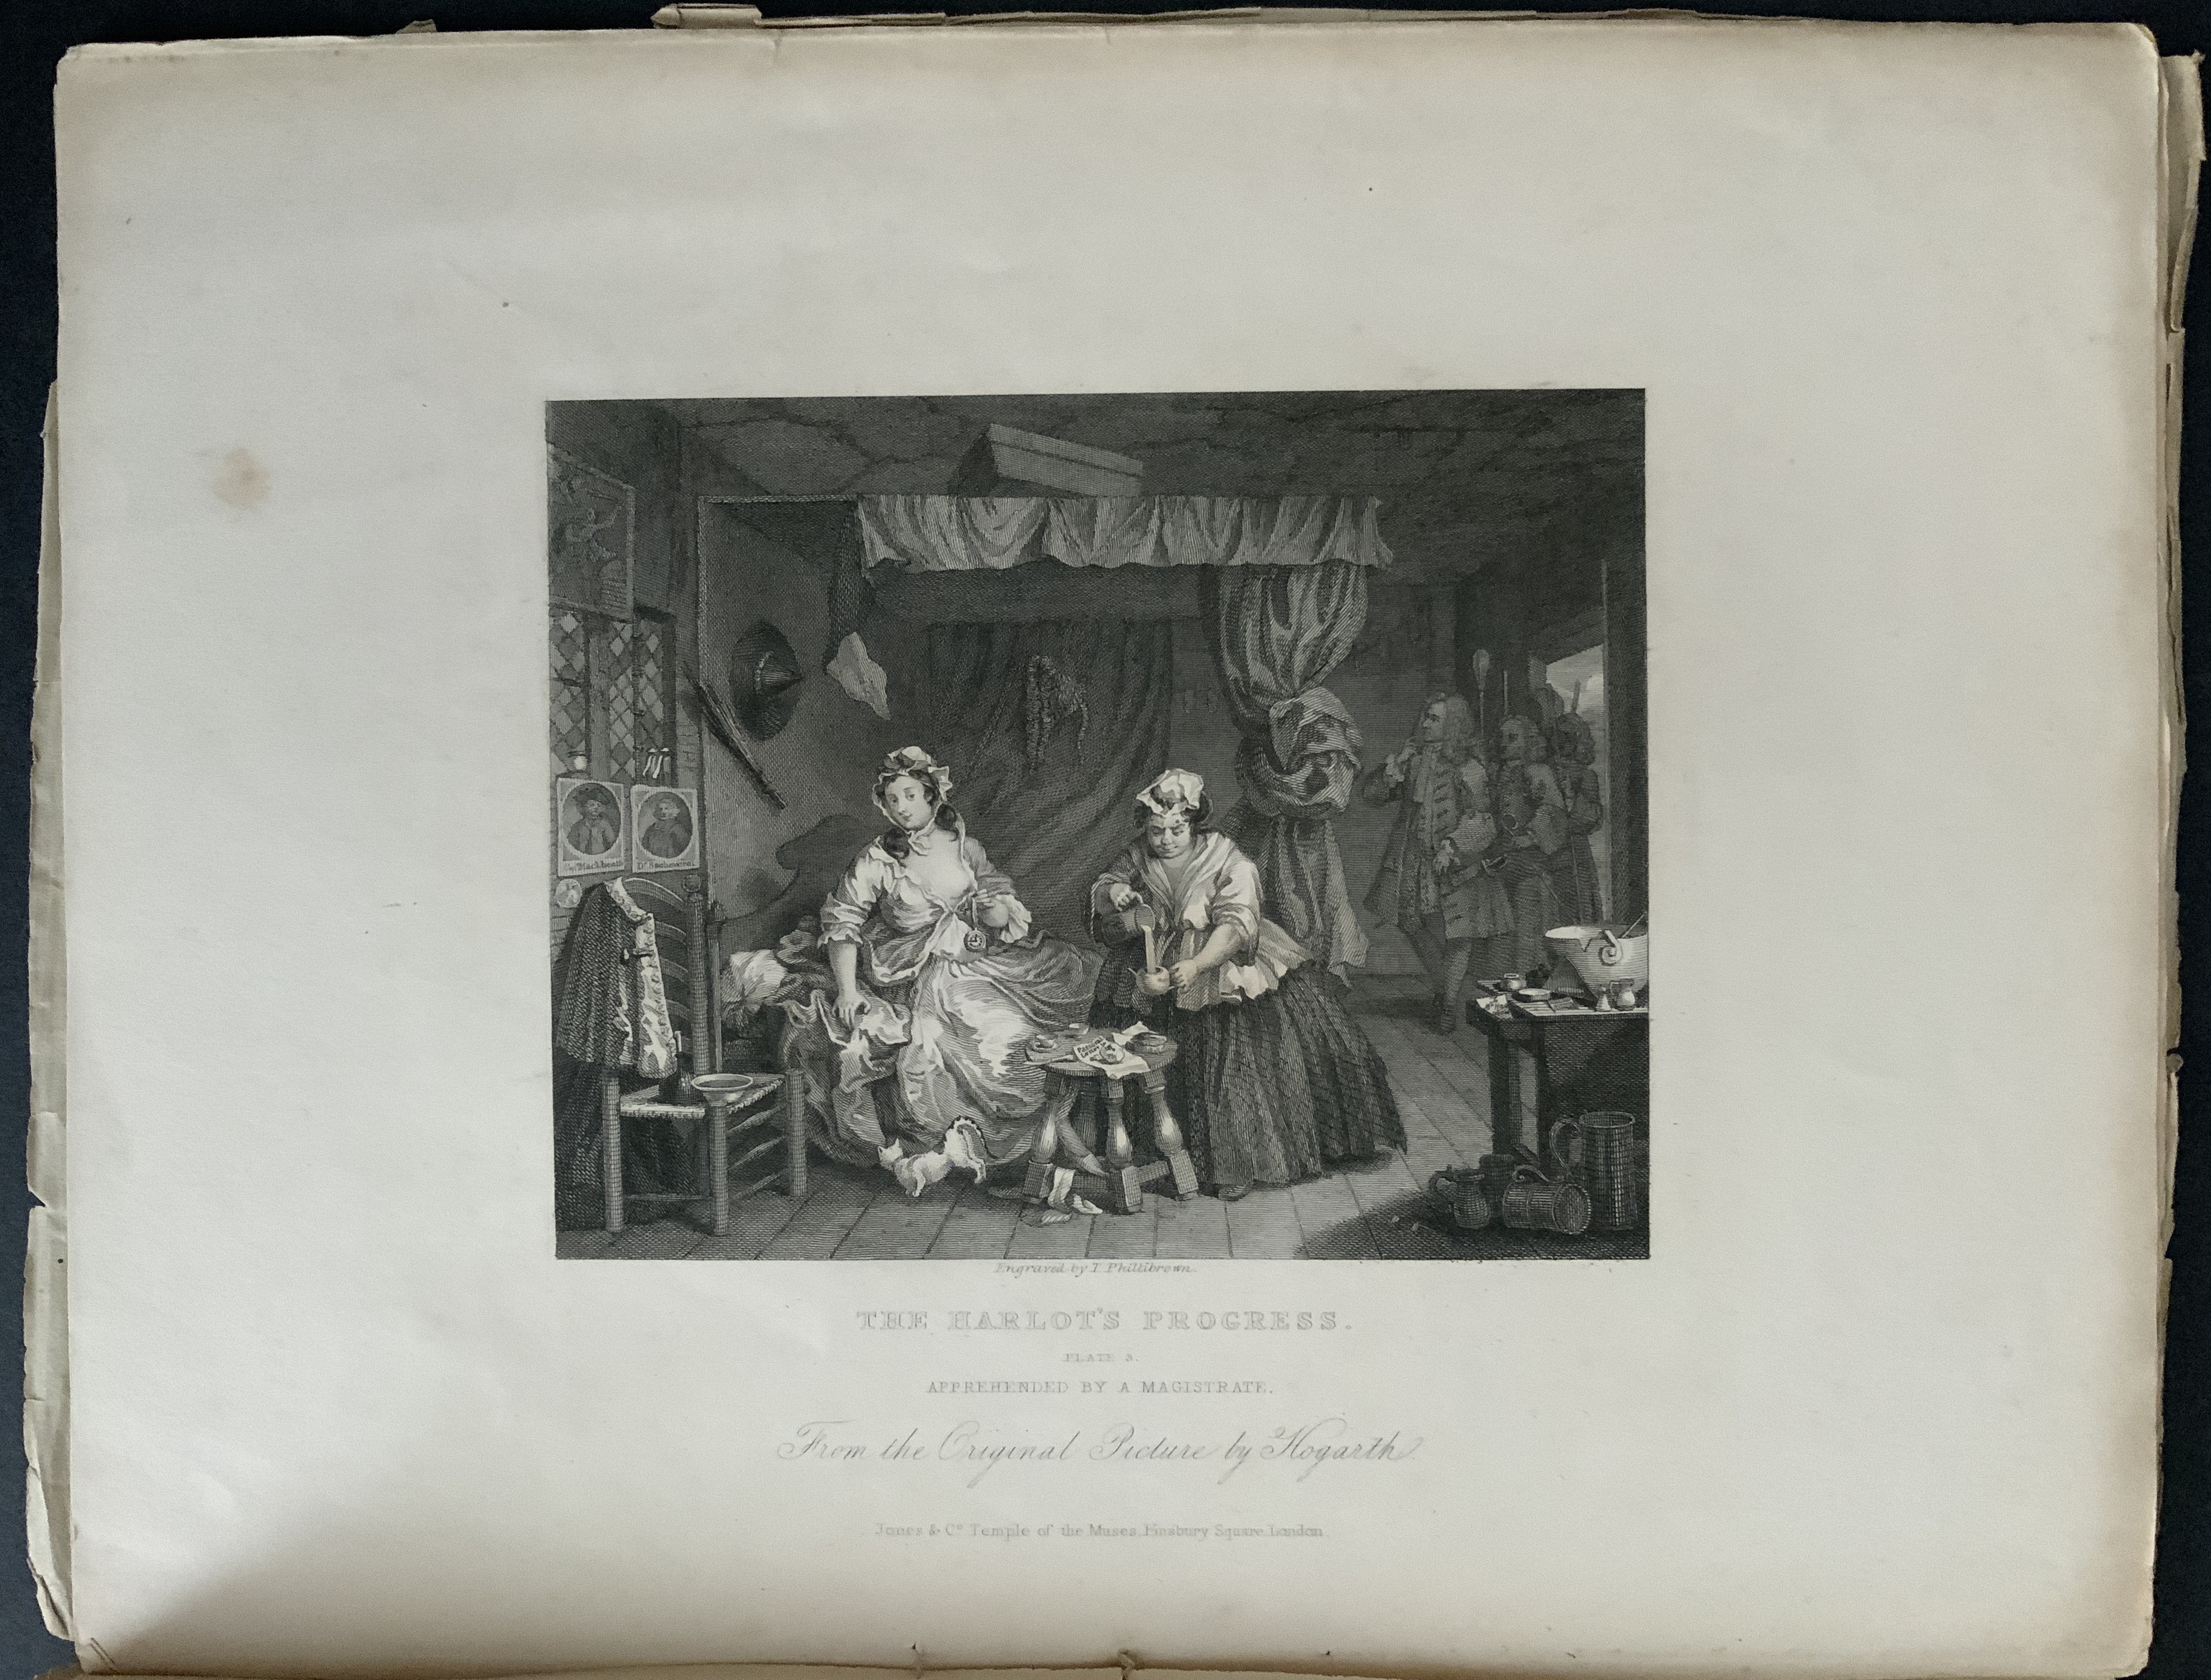 FOUR MAGAZINES OF COMMEMORATION EDITION OF THE WORKS OF WILLIAM HOGARTH IN THE SERIES OF ENGRAVINGS - Image 6 of 8